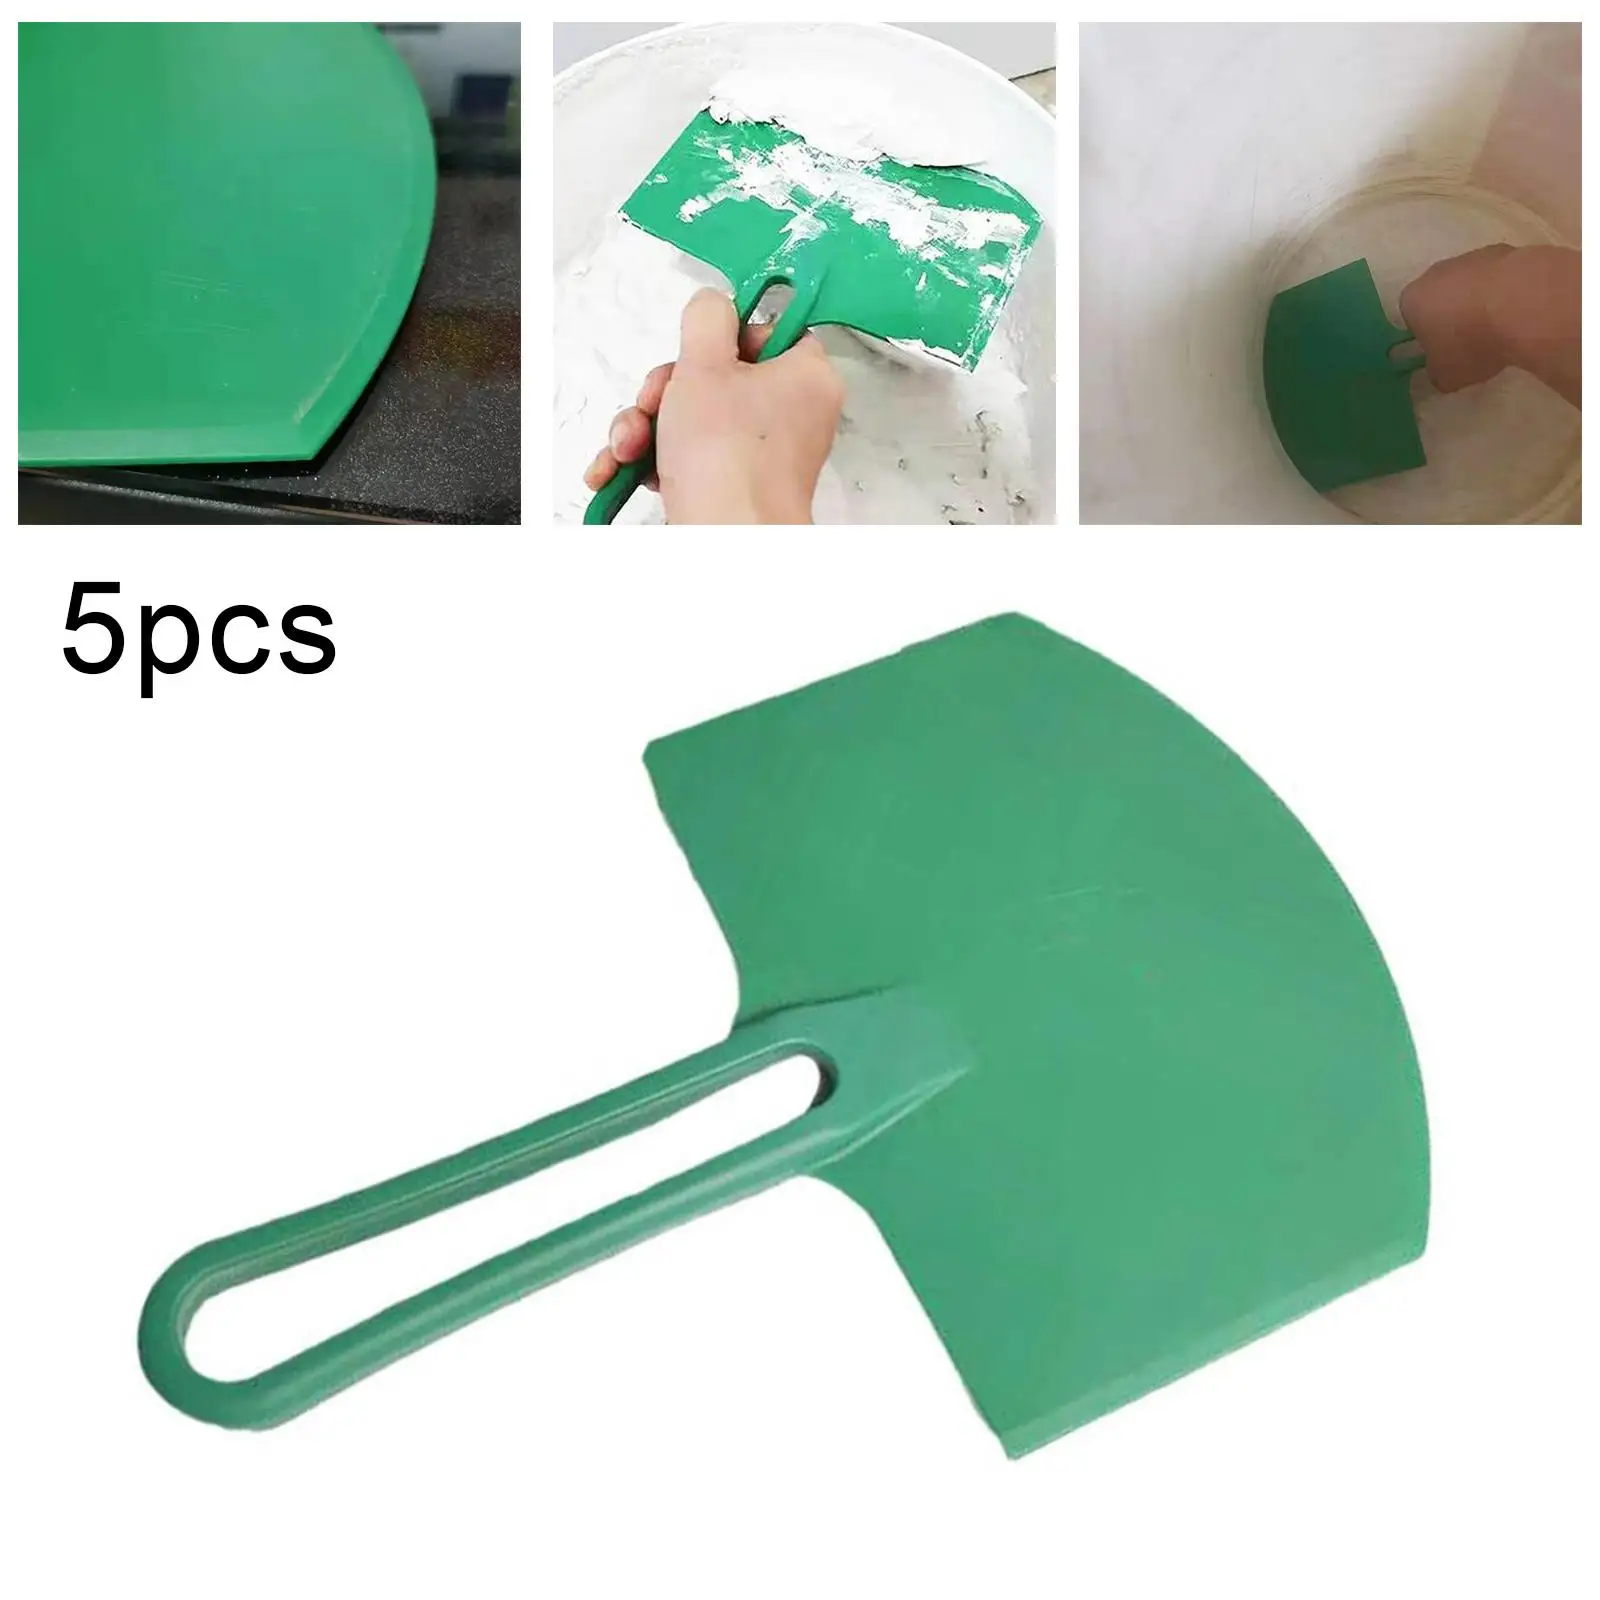 Flexible Plastic Paint Scrapers Knife Spreader Spackle Scrapers for Repairing Wall Wall Painting Home Improvement